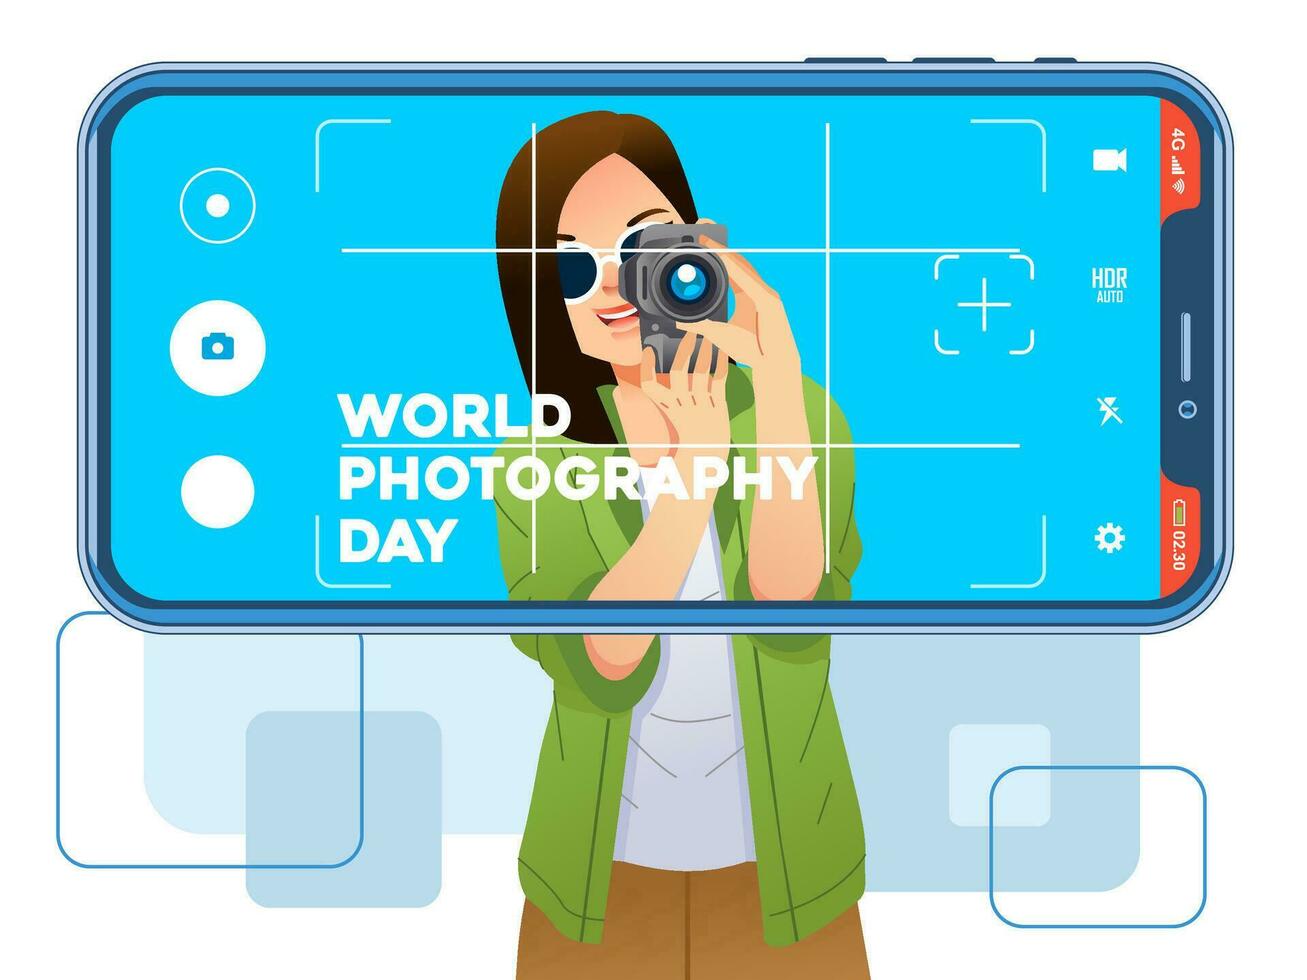 young preety girl pose with camera and photographed using a smartphone vector illustration